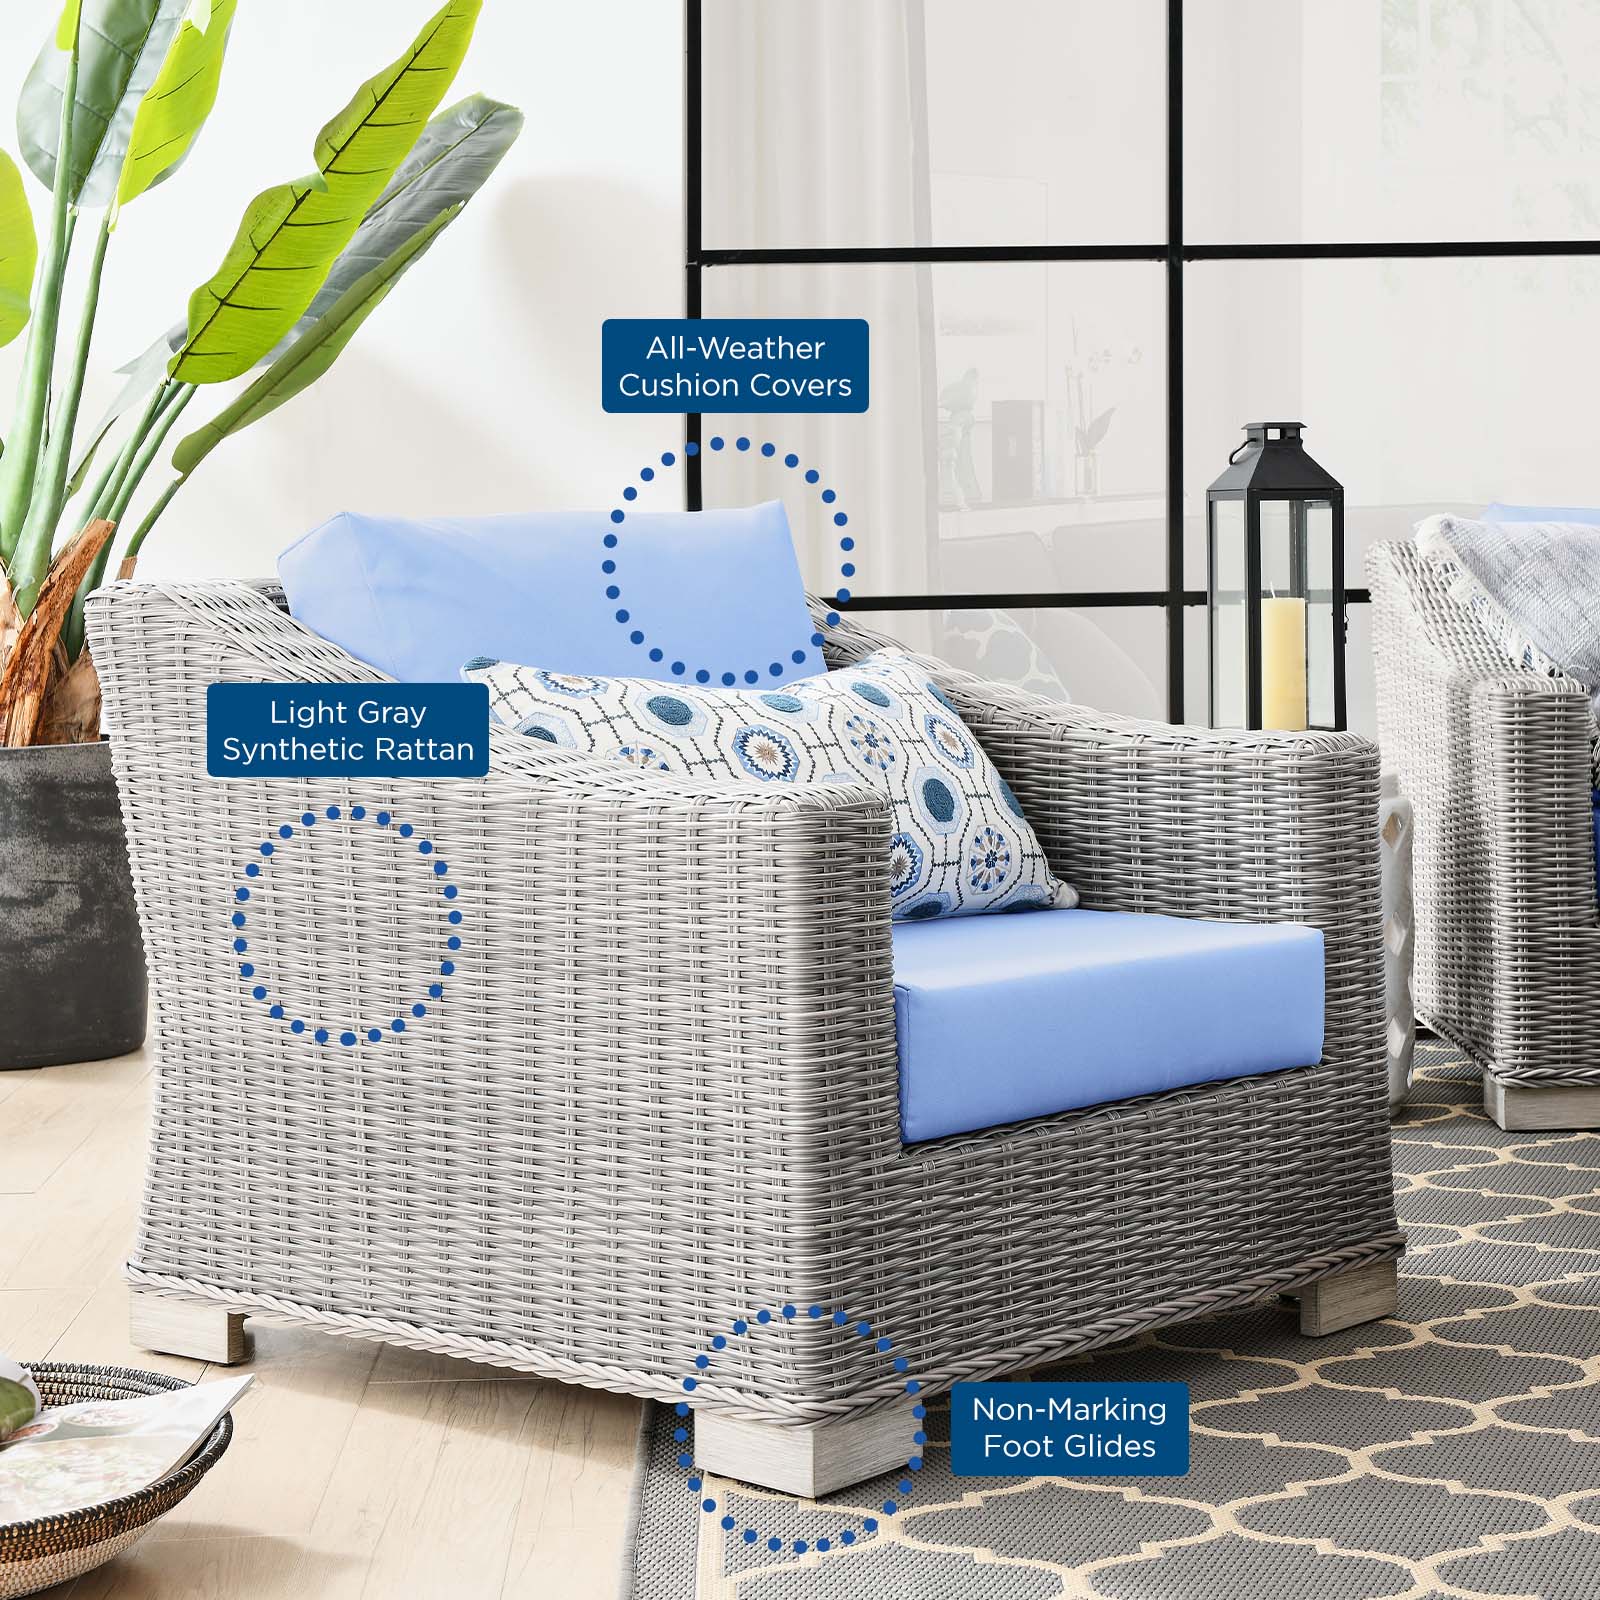 Lounge Sectional Sofa Chair Table Set, Rattan, Wicker, Light Grey Gray Light Blue, Modern Contemporary Urban Design, Outdoor Patio Balcony Cafe Bistro Garden Furniture Hotel Hospitality - image 5 of 10